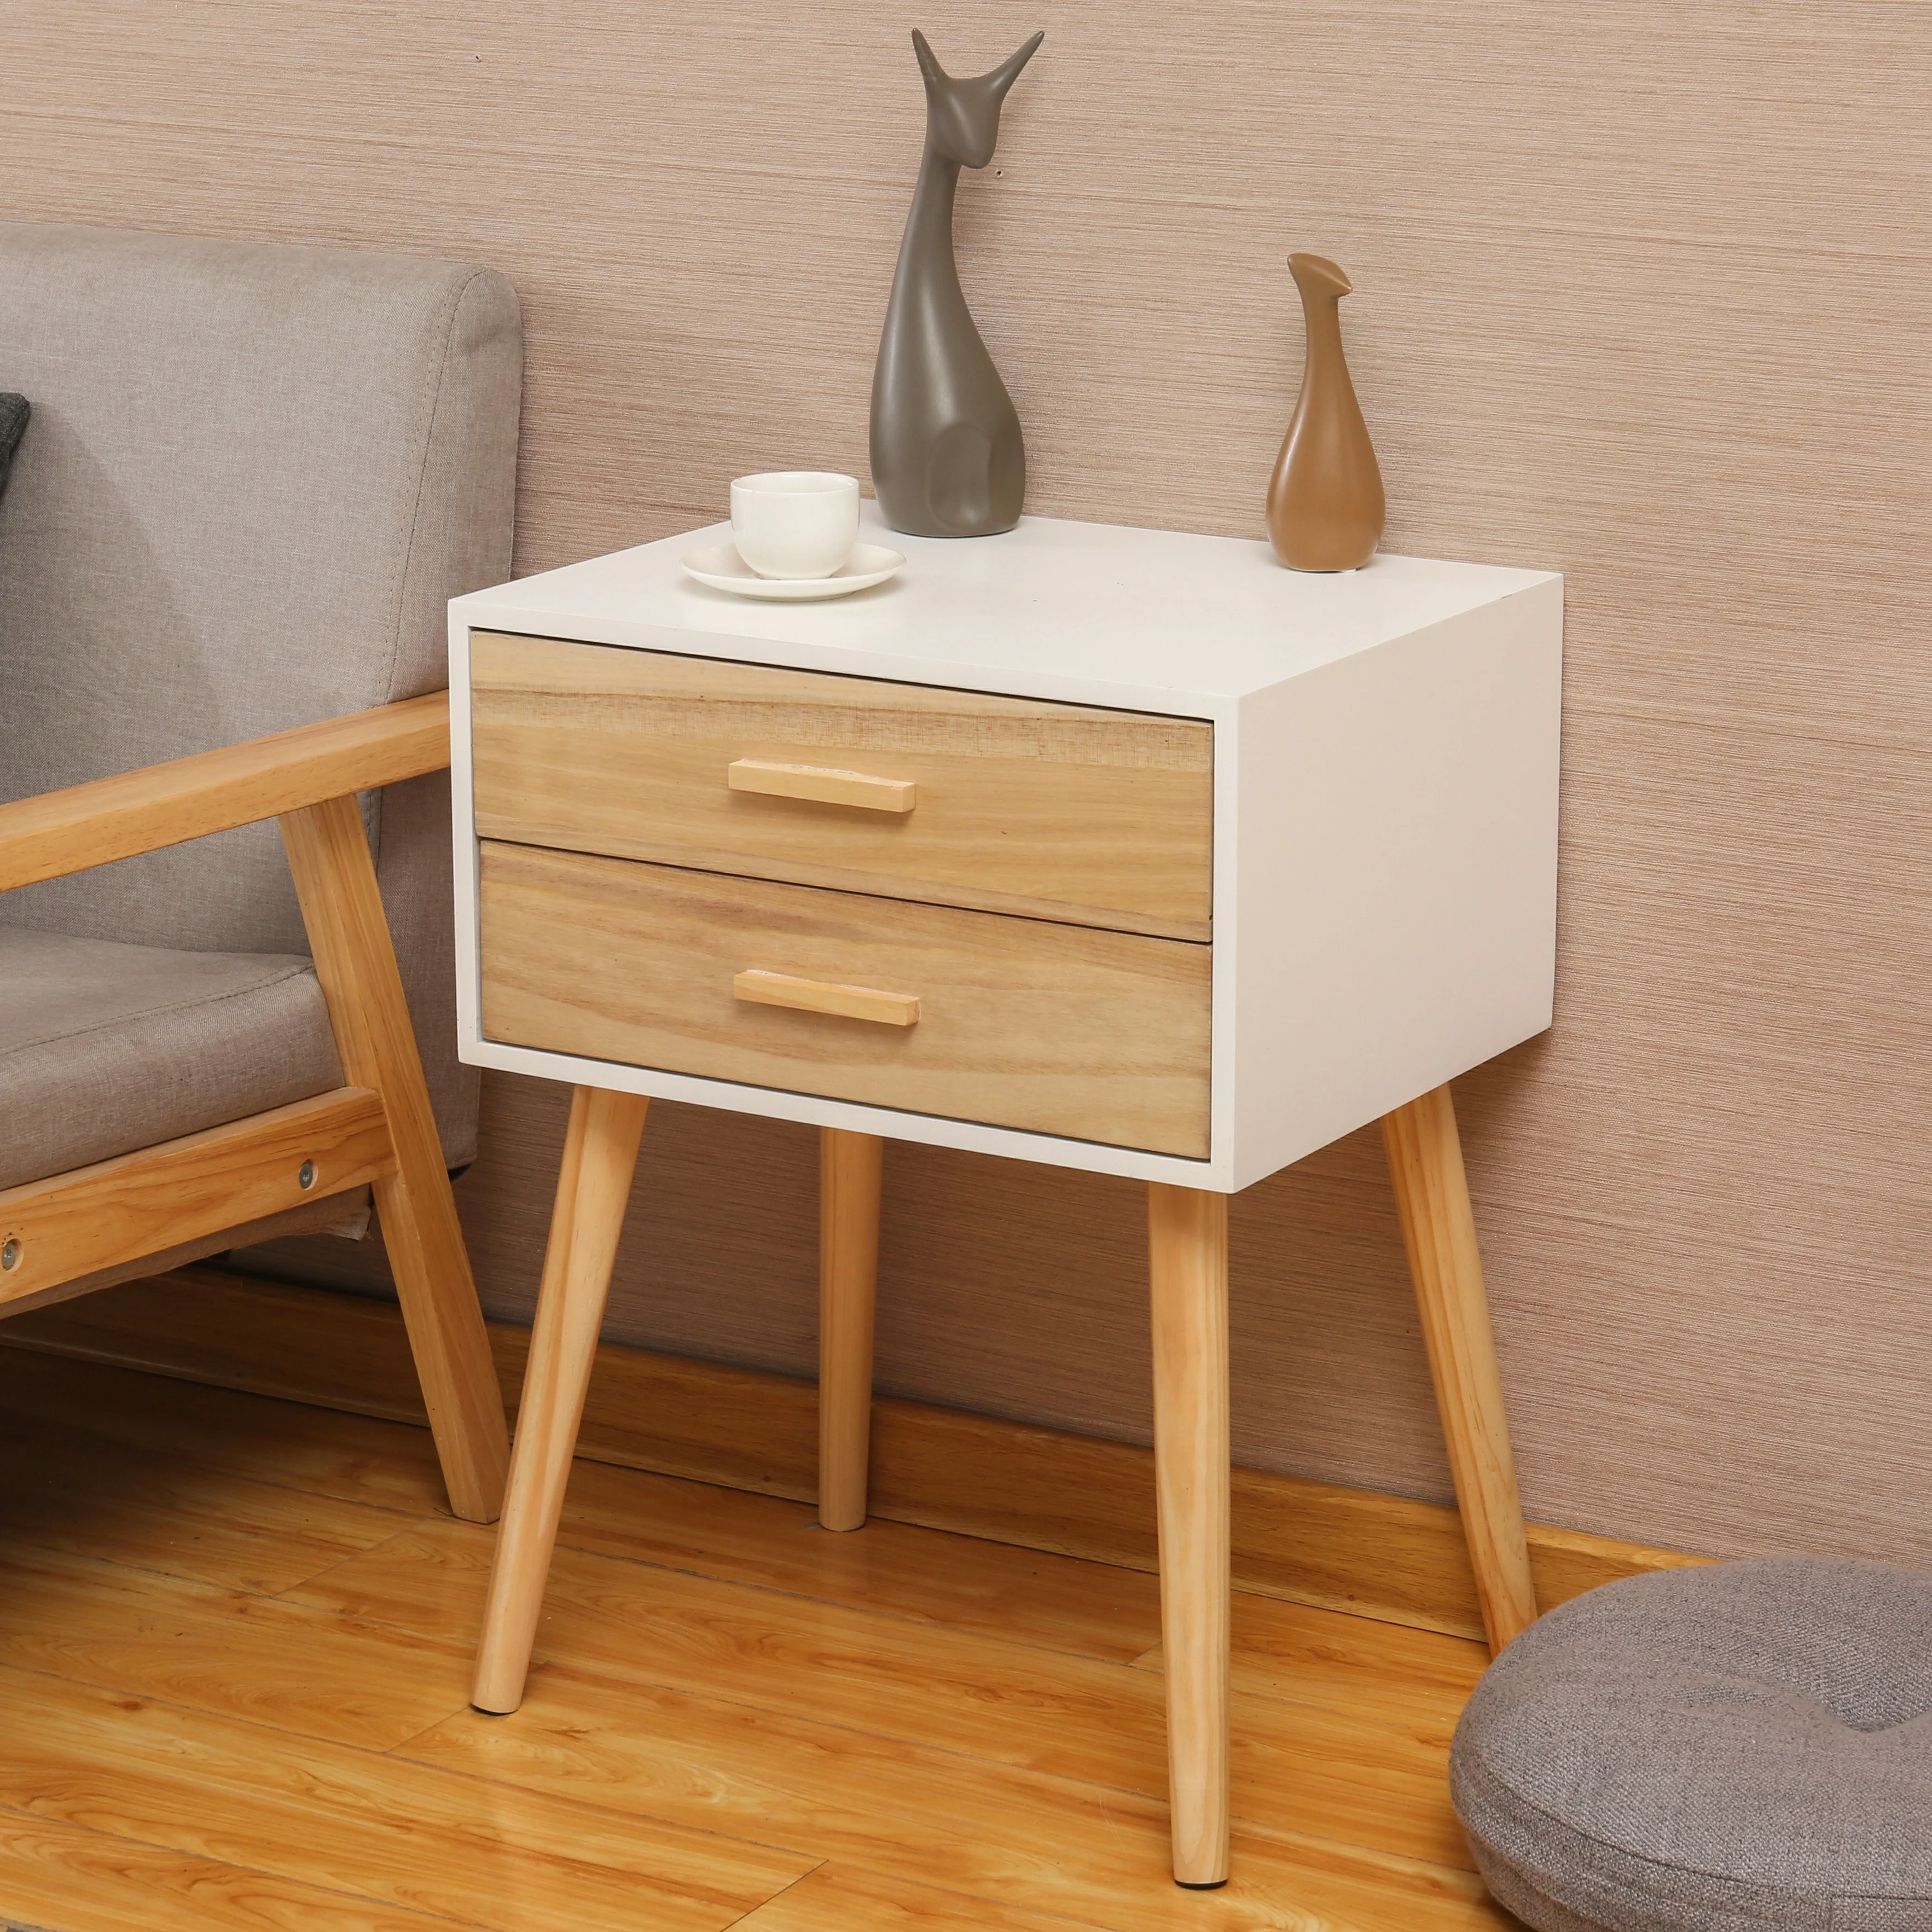 Modern Bedroom Furniture Solid Wood Pine Bedside Table With 2 Drawers View Pine Bedside Table Jmf Product Details From Yantai Jmf Sport Products